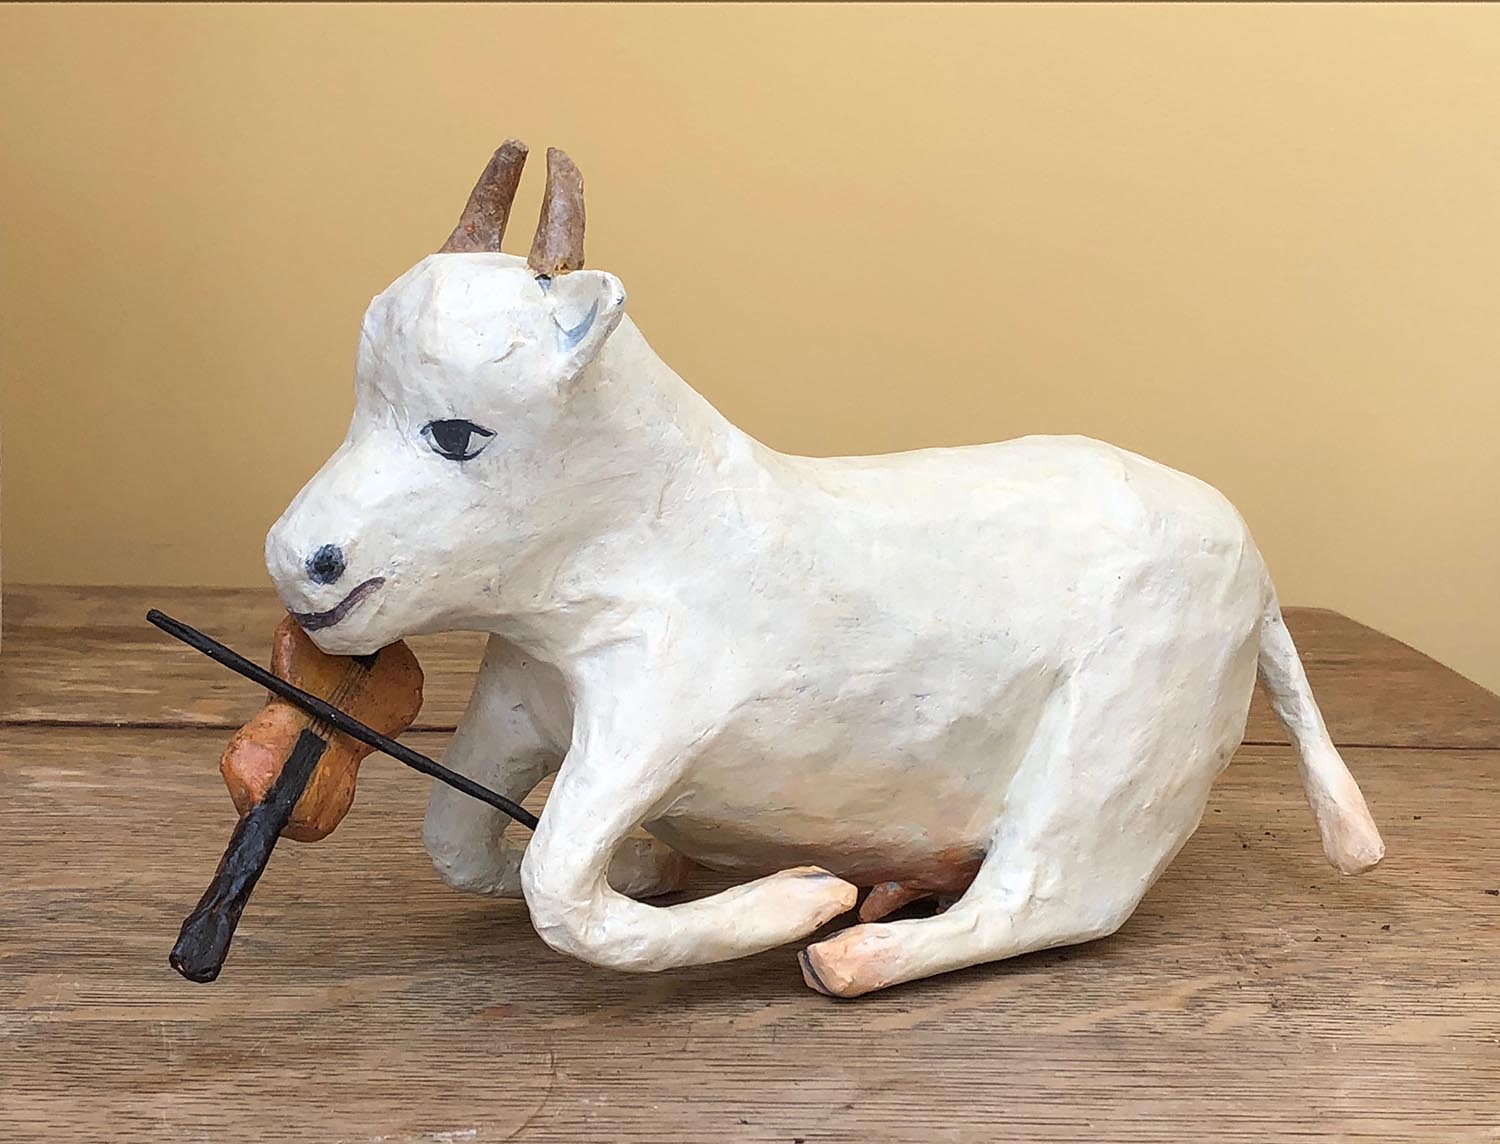 Image of Chagall's Cow sculpture